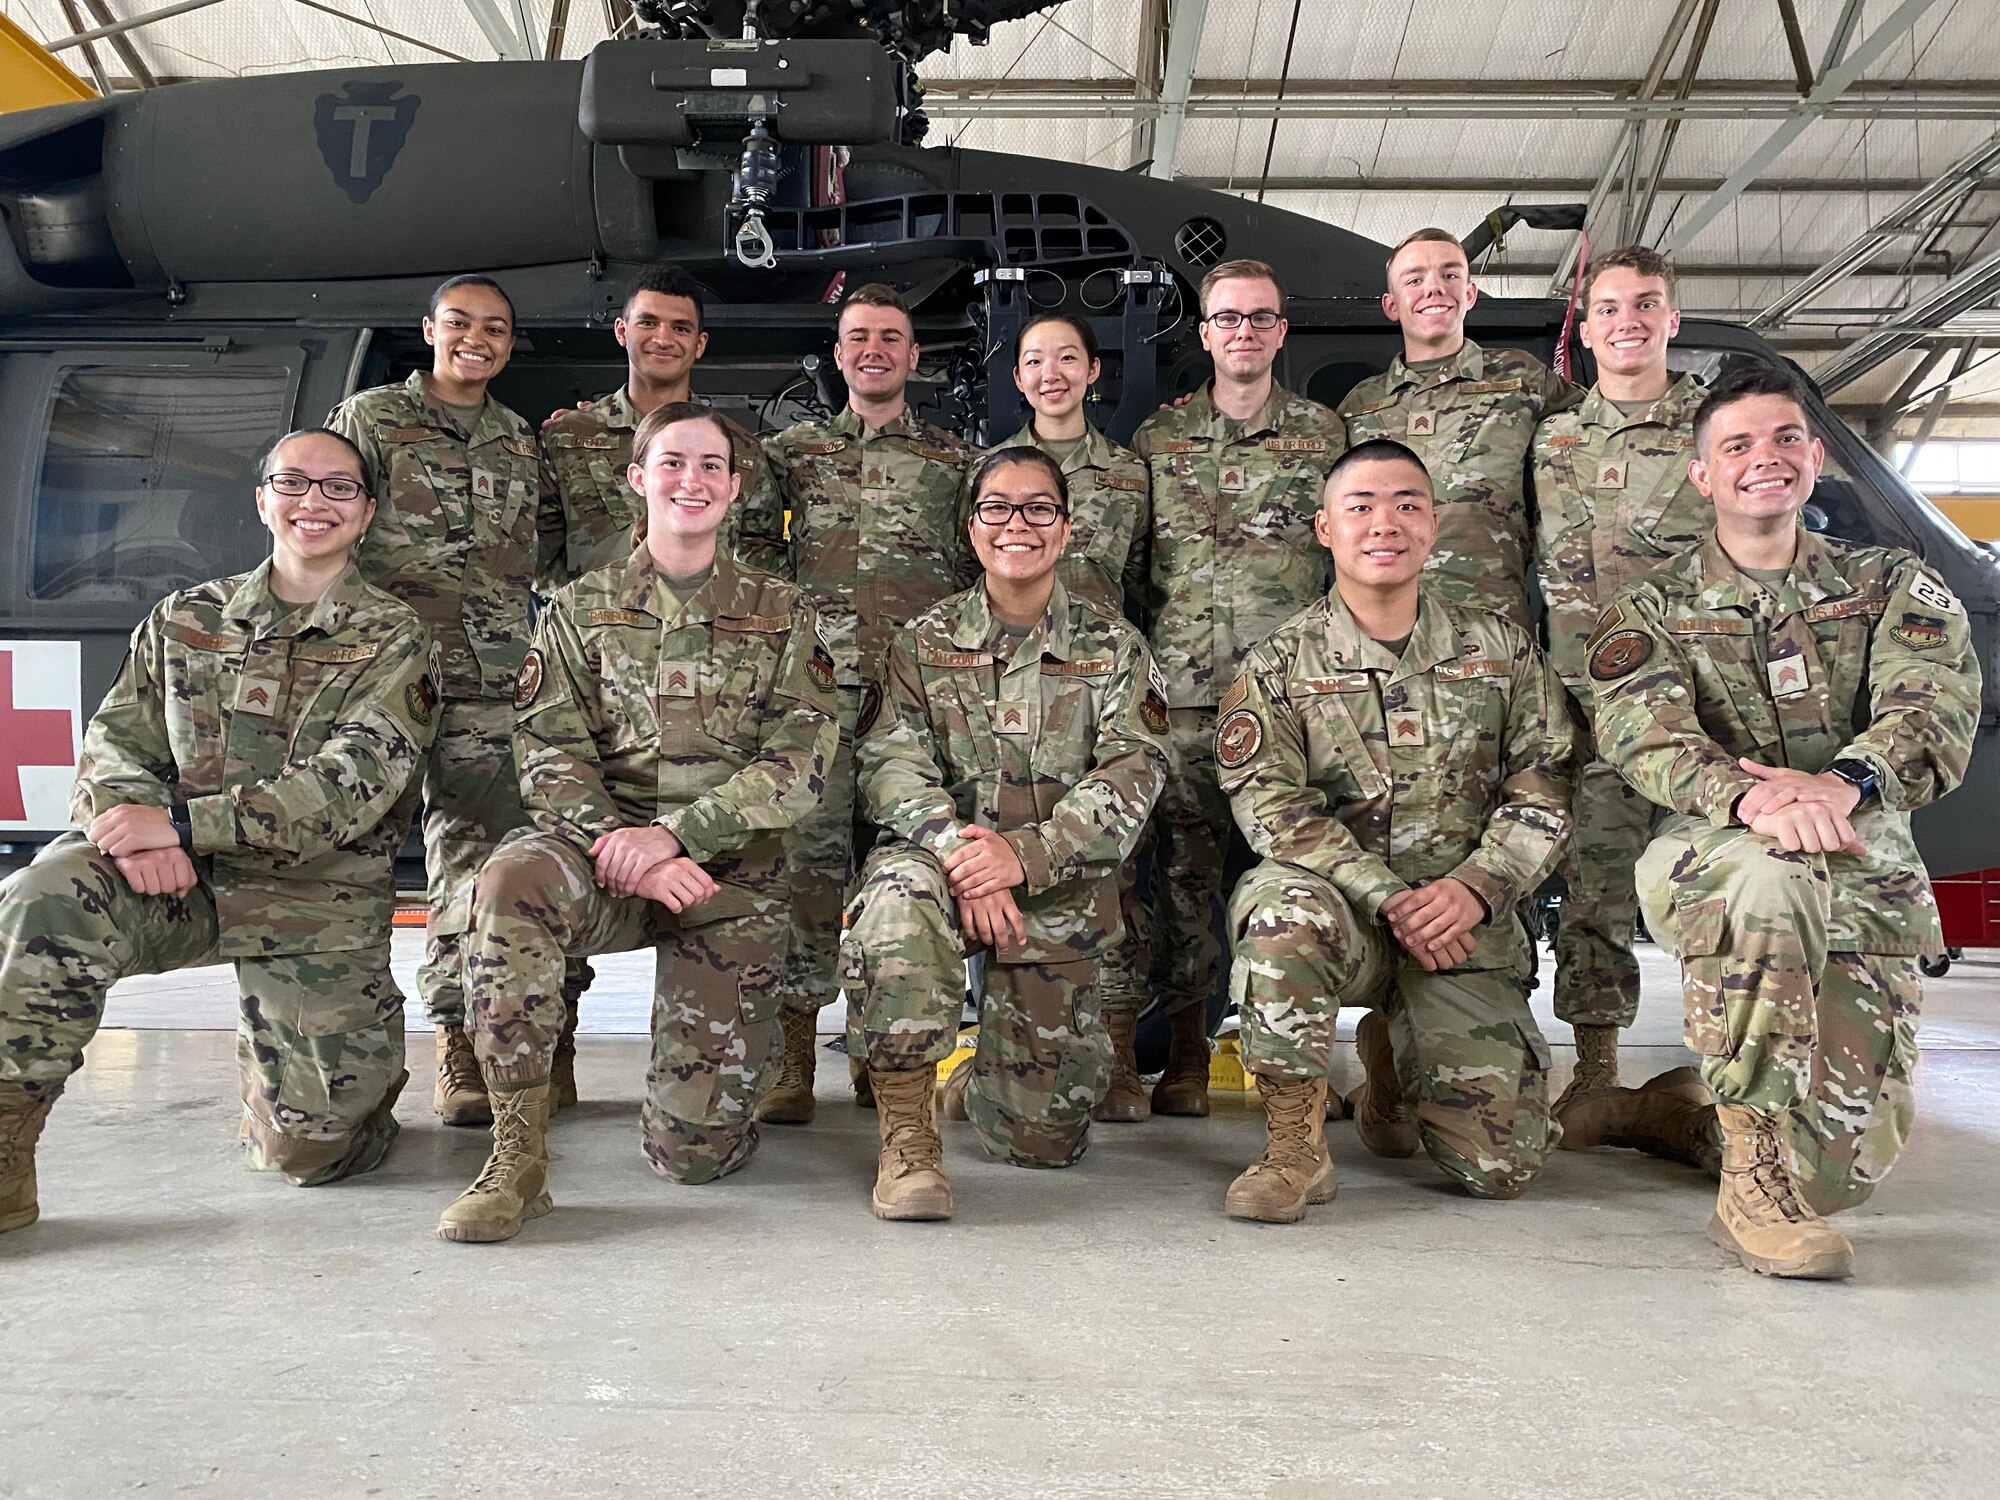 Cadets from the U.S. Air Force Academy pose in front of a UH-60 Blackhawk helicopter at Martindale Army Airfield, San Antonio, Texas, May 28, 2021.